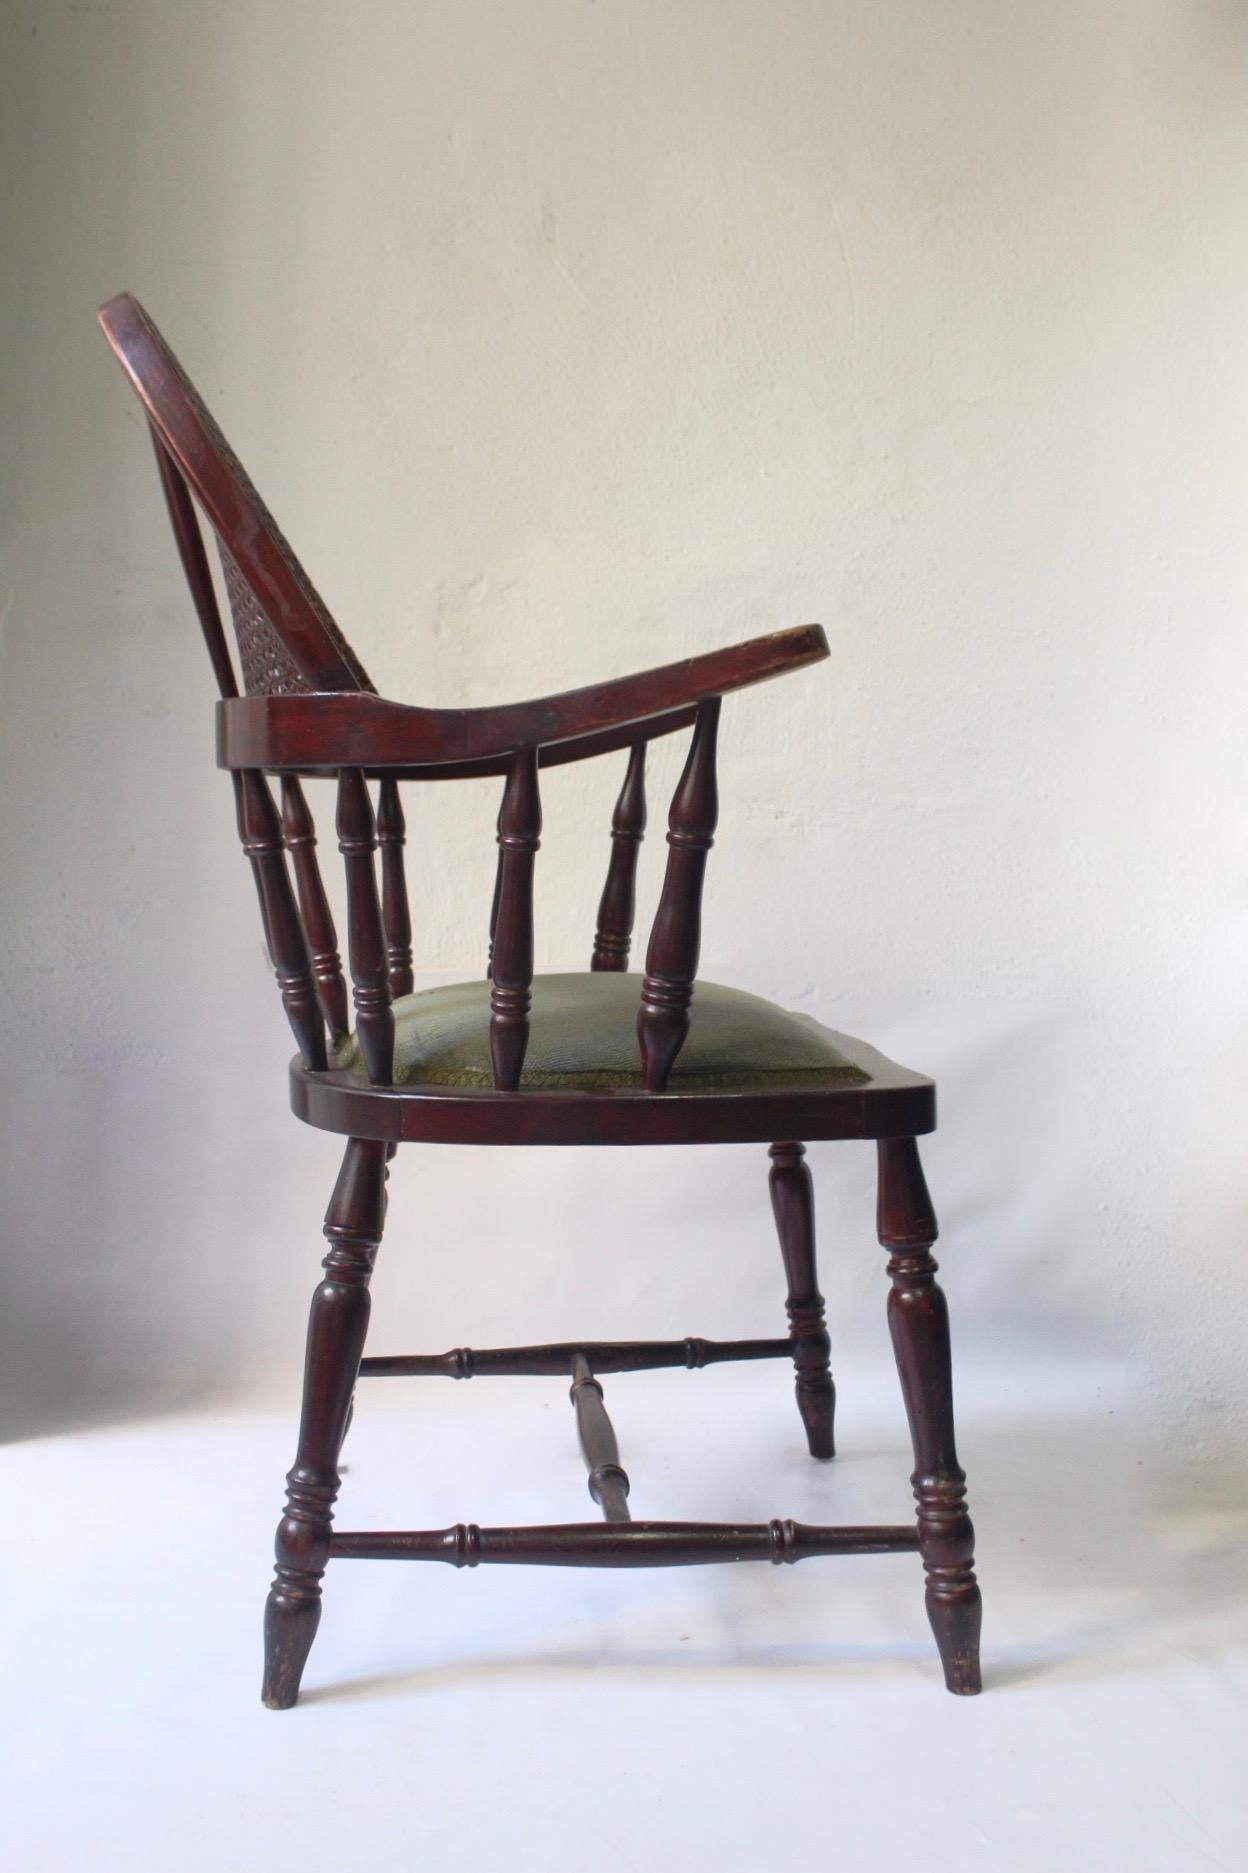 Country Antique Uncommon English Windsor Stick Back Caned Chair, Late 19th Century For Sale